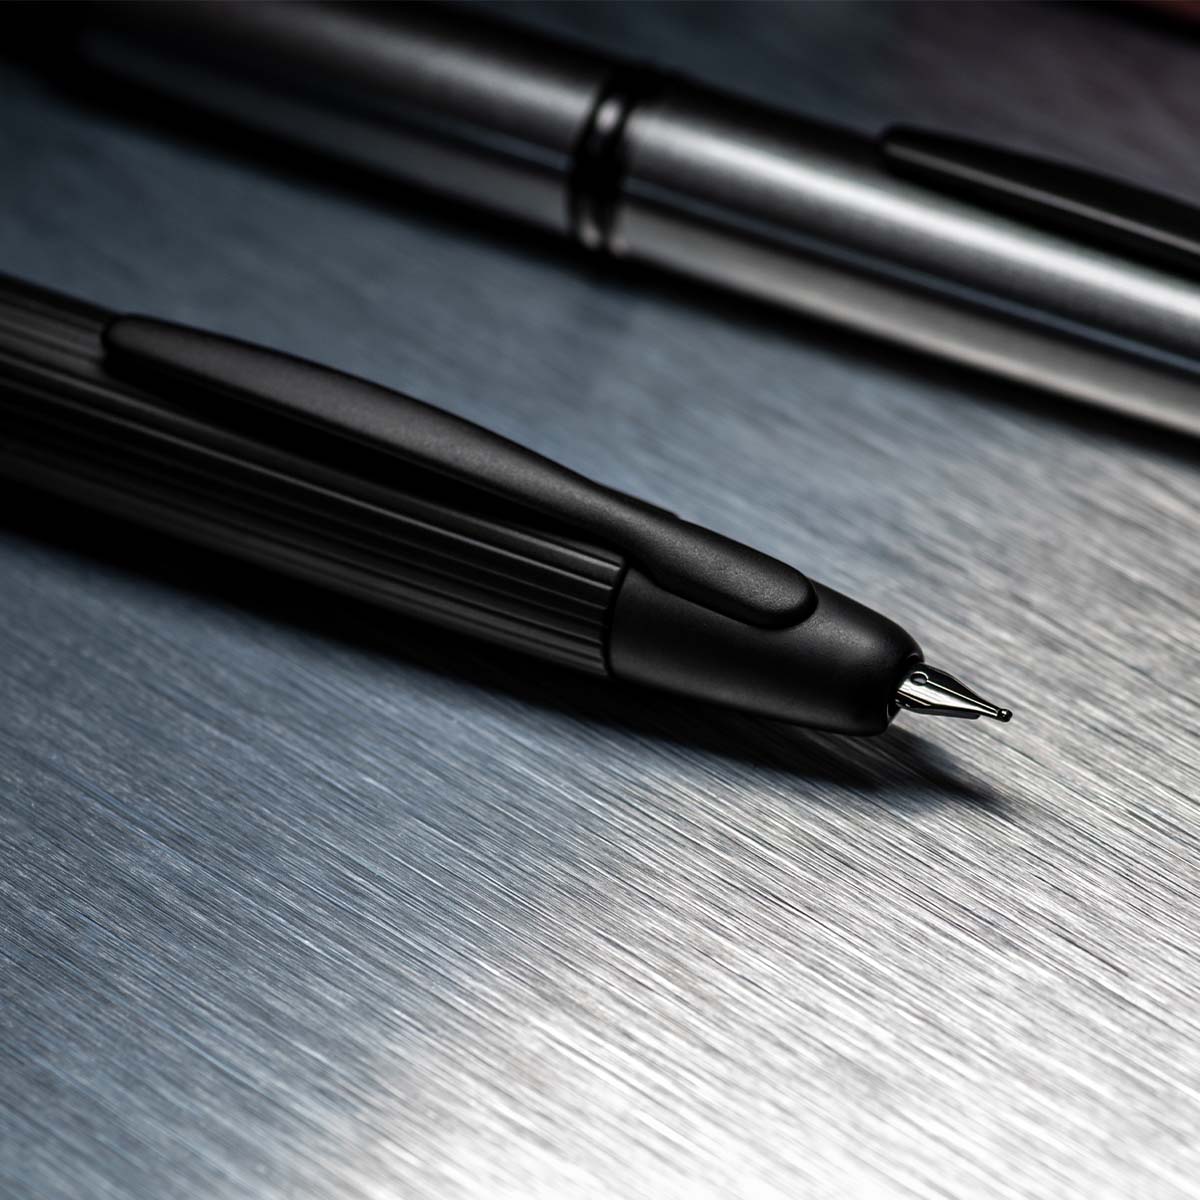 Capless Matte Black Trims in the group Pens / Fine Writing / Gift Pens at Pen Store (109507_r)